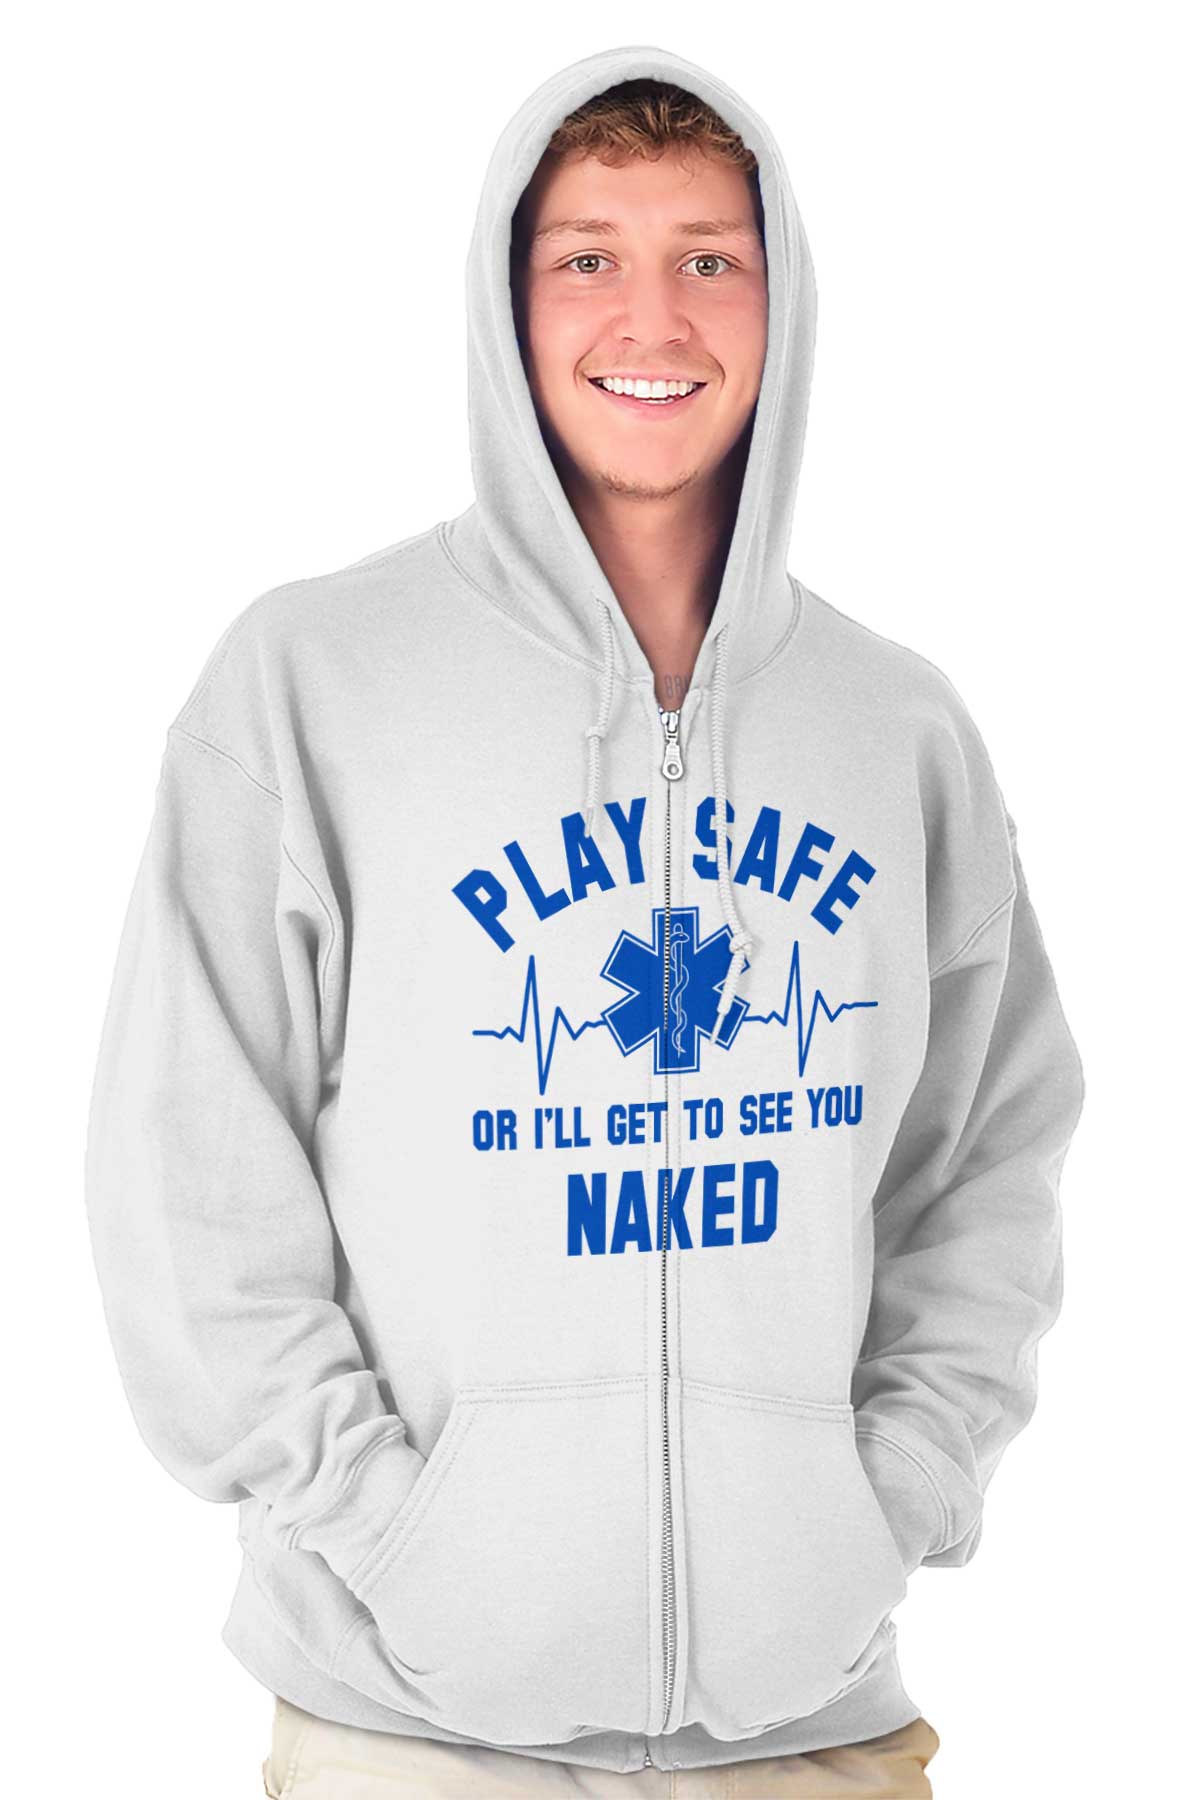 Play Safe Ill Get To See You Naked Funny Emt Adult Zip Hoodie Jacket